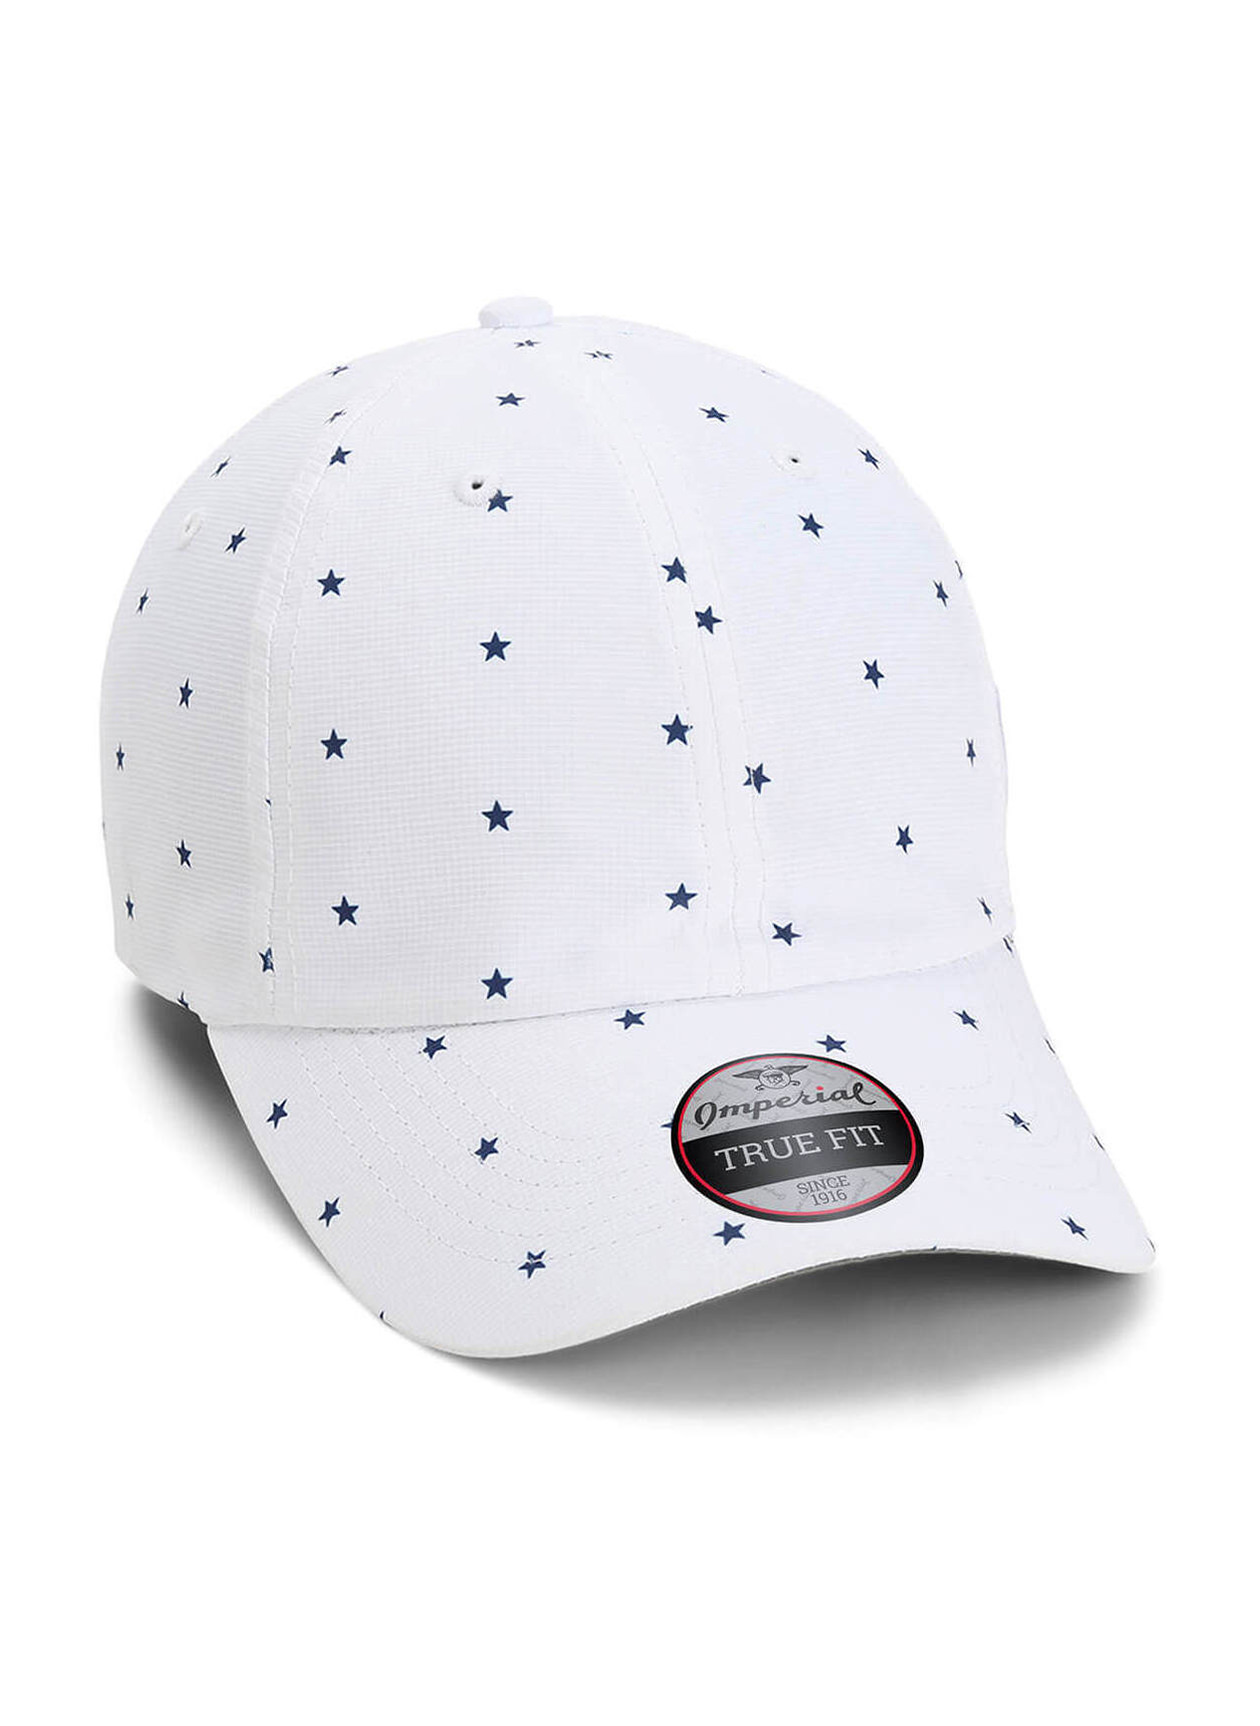 Imperial White / Navy Stars The Alter Ego Pattered Performance Hat